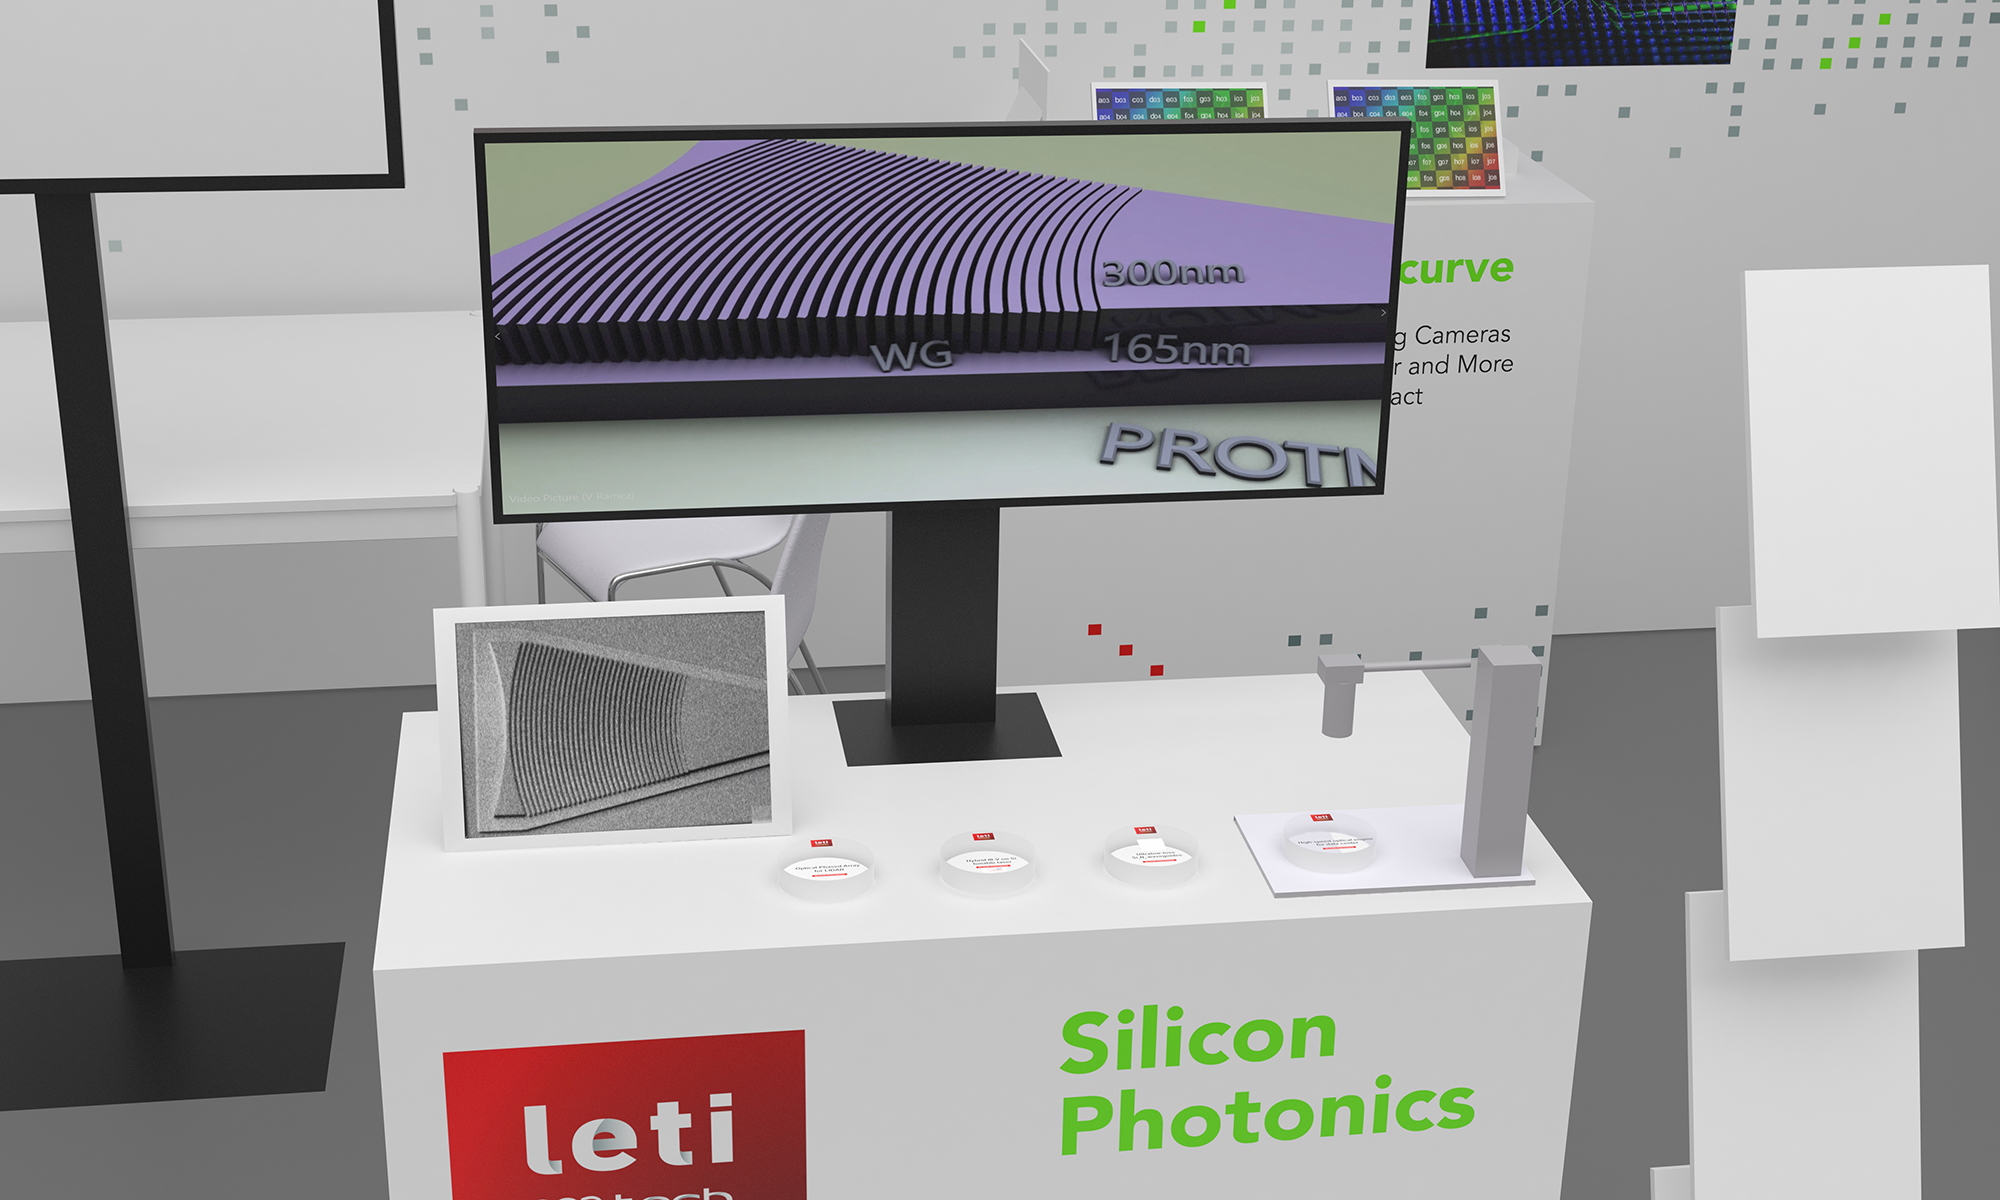 CEA-Leti Clears a Path to Developing Ultralow Loss, High-Power Photonics in UV through Mid-Infrared Wavelengths